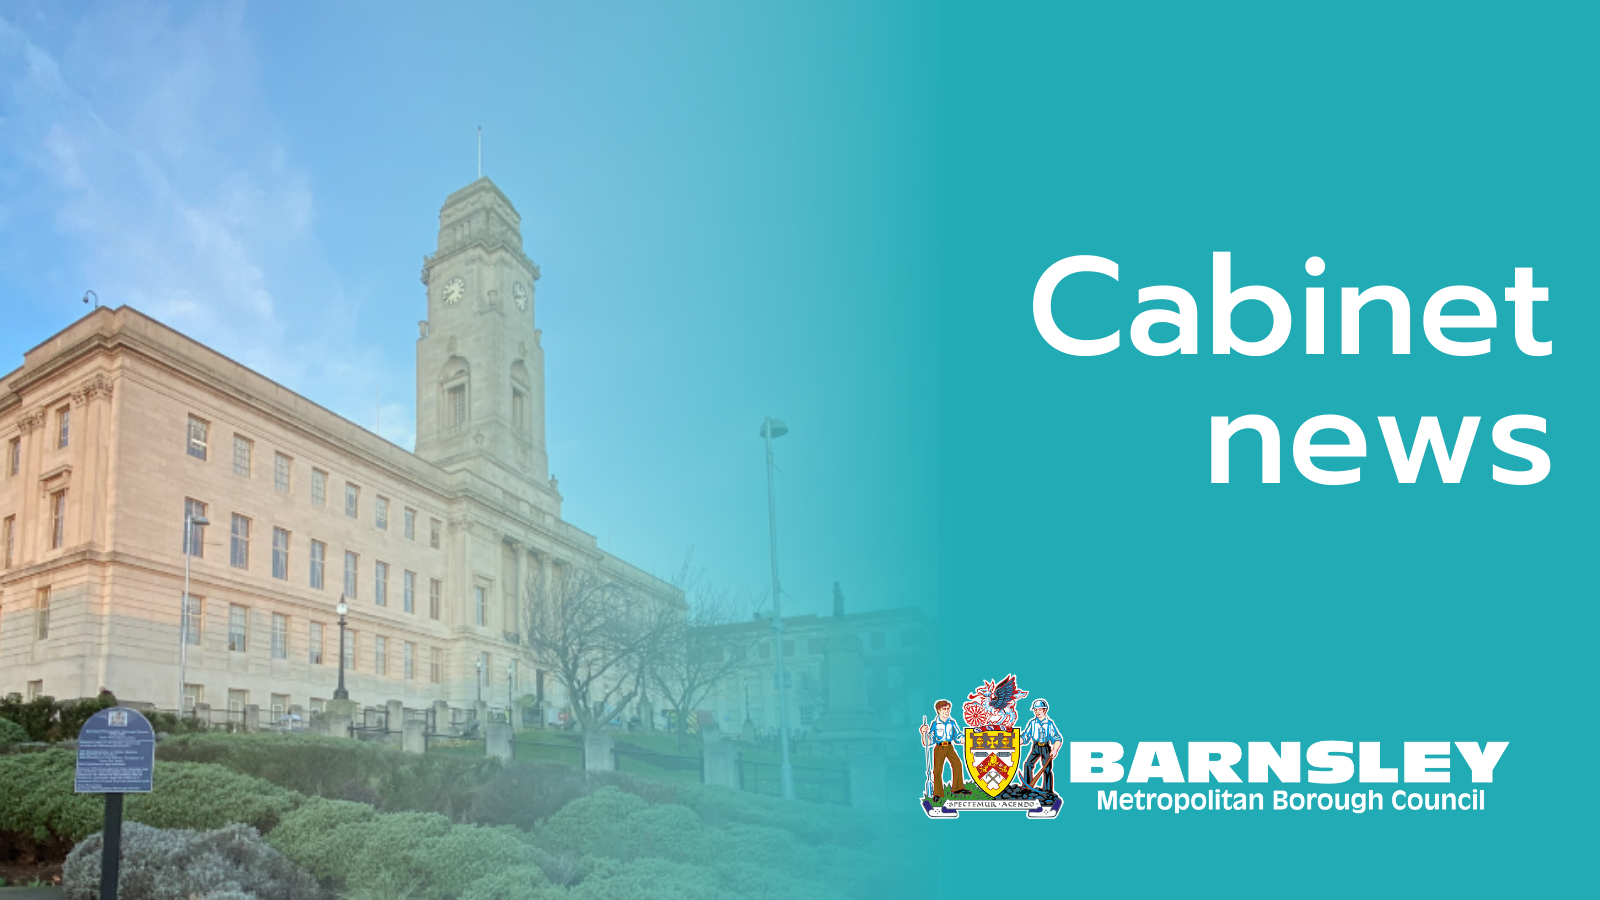 Cabinet news with picture of Barnsley Town Hall